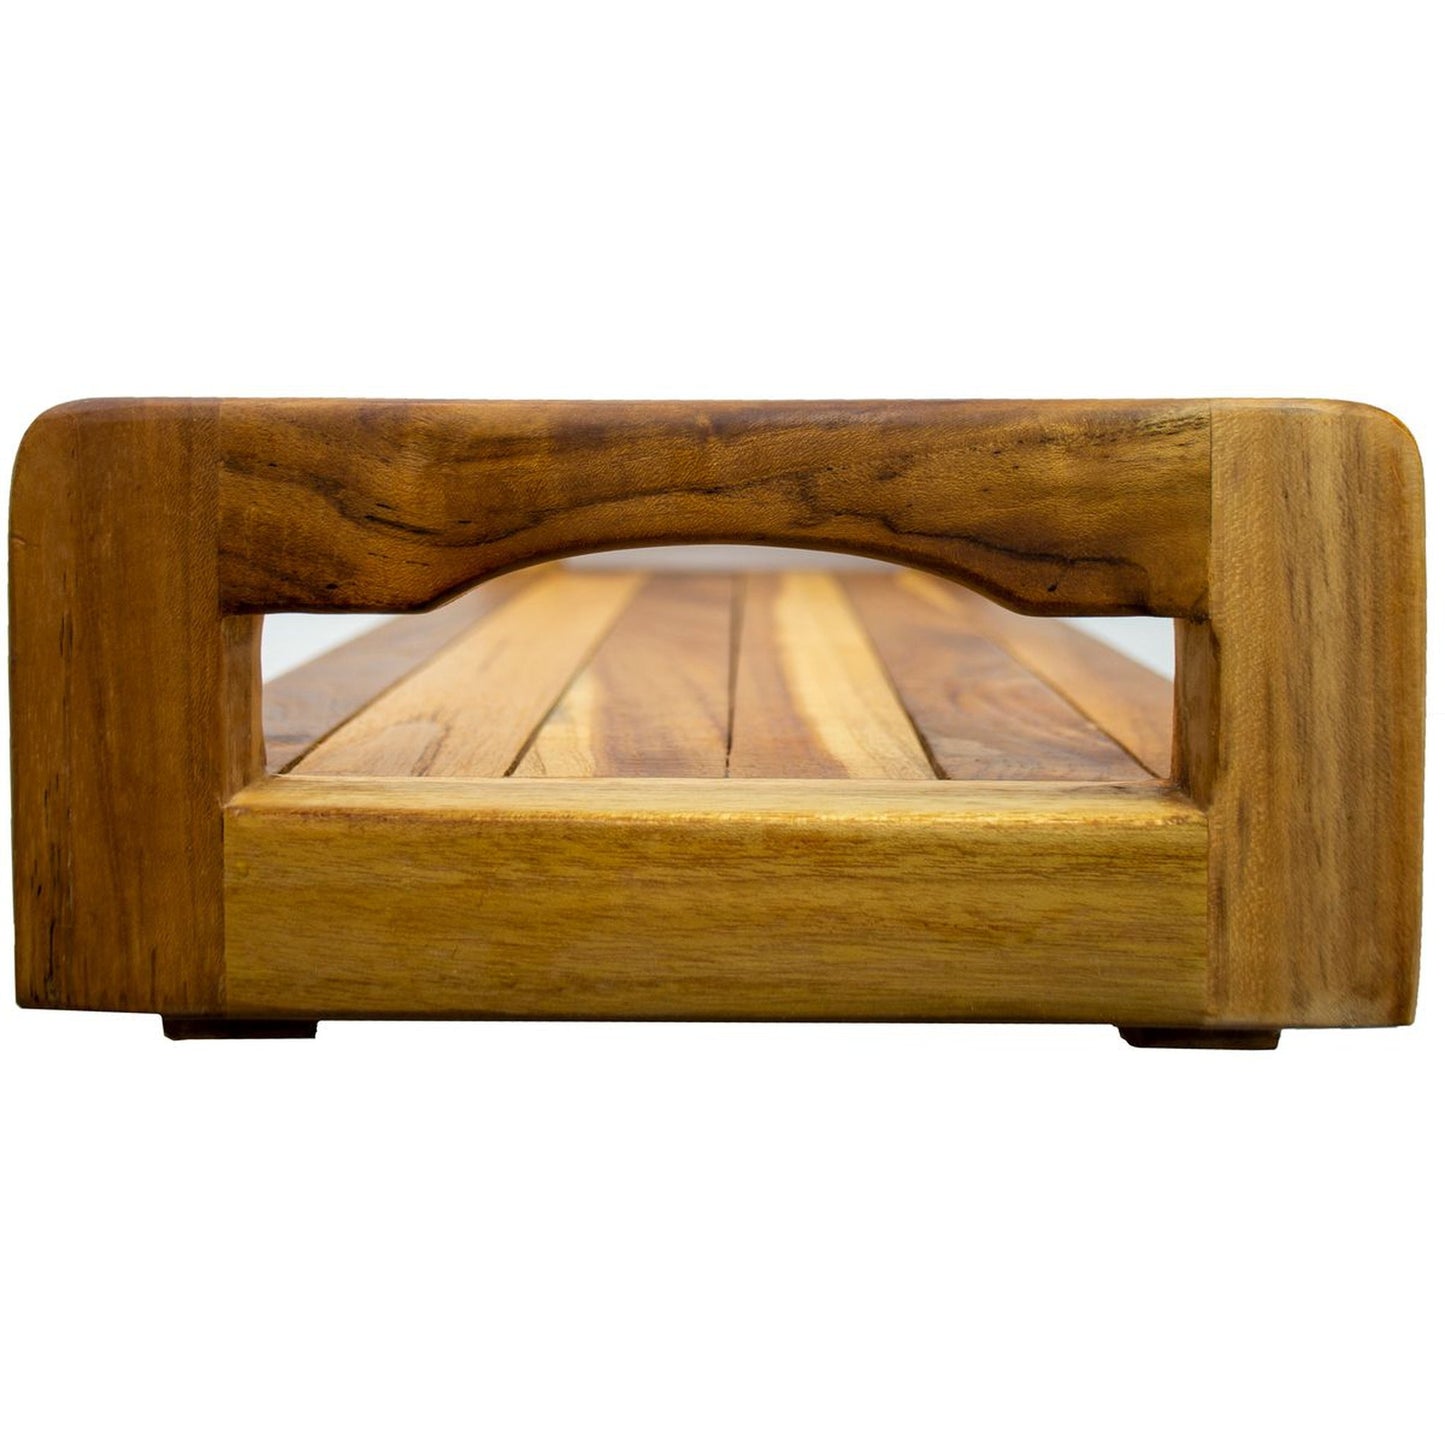 EcoDecors Eleganto 29" EarthyTeak Solid Teak Wood Bath Tray and Seat With LiftAide Arms